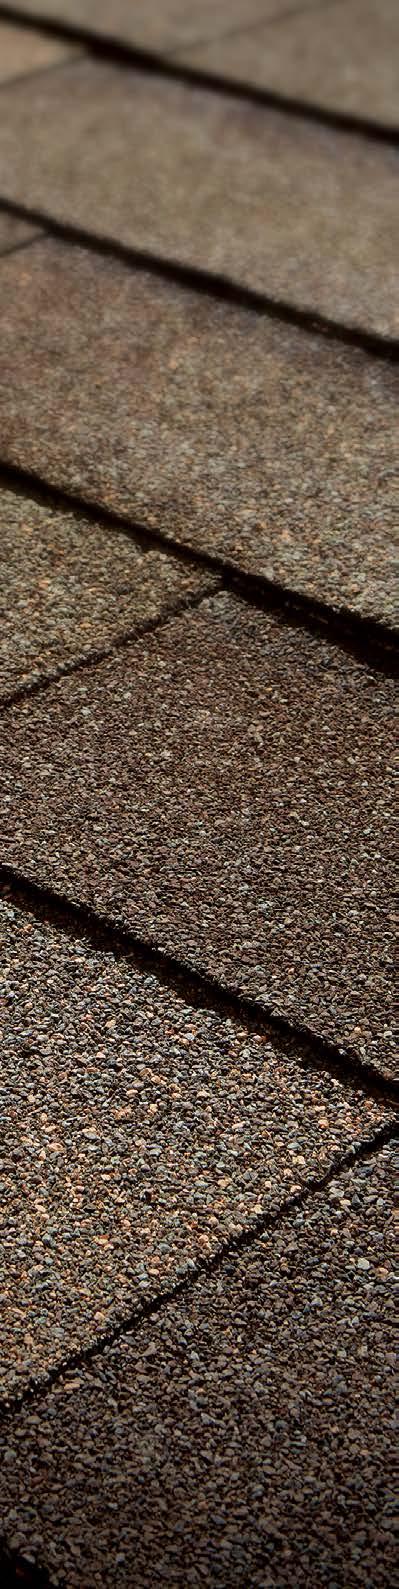 Heritage Woodgate shingles come with a 30-year Limited Warranty and 15-year Full Start Period.